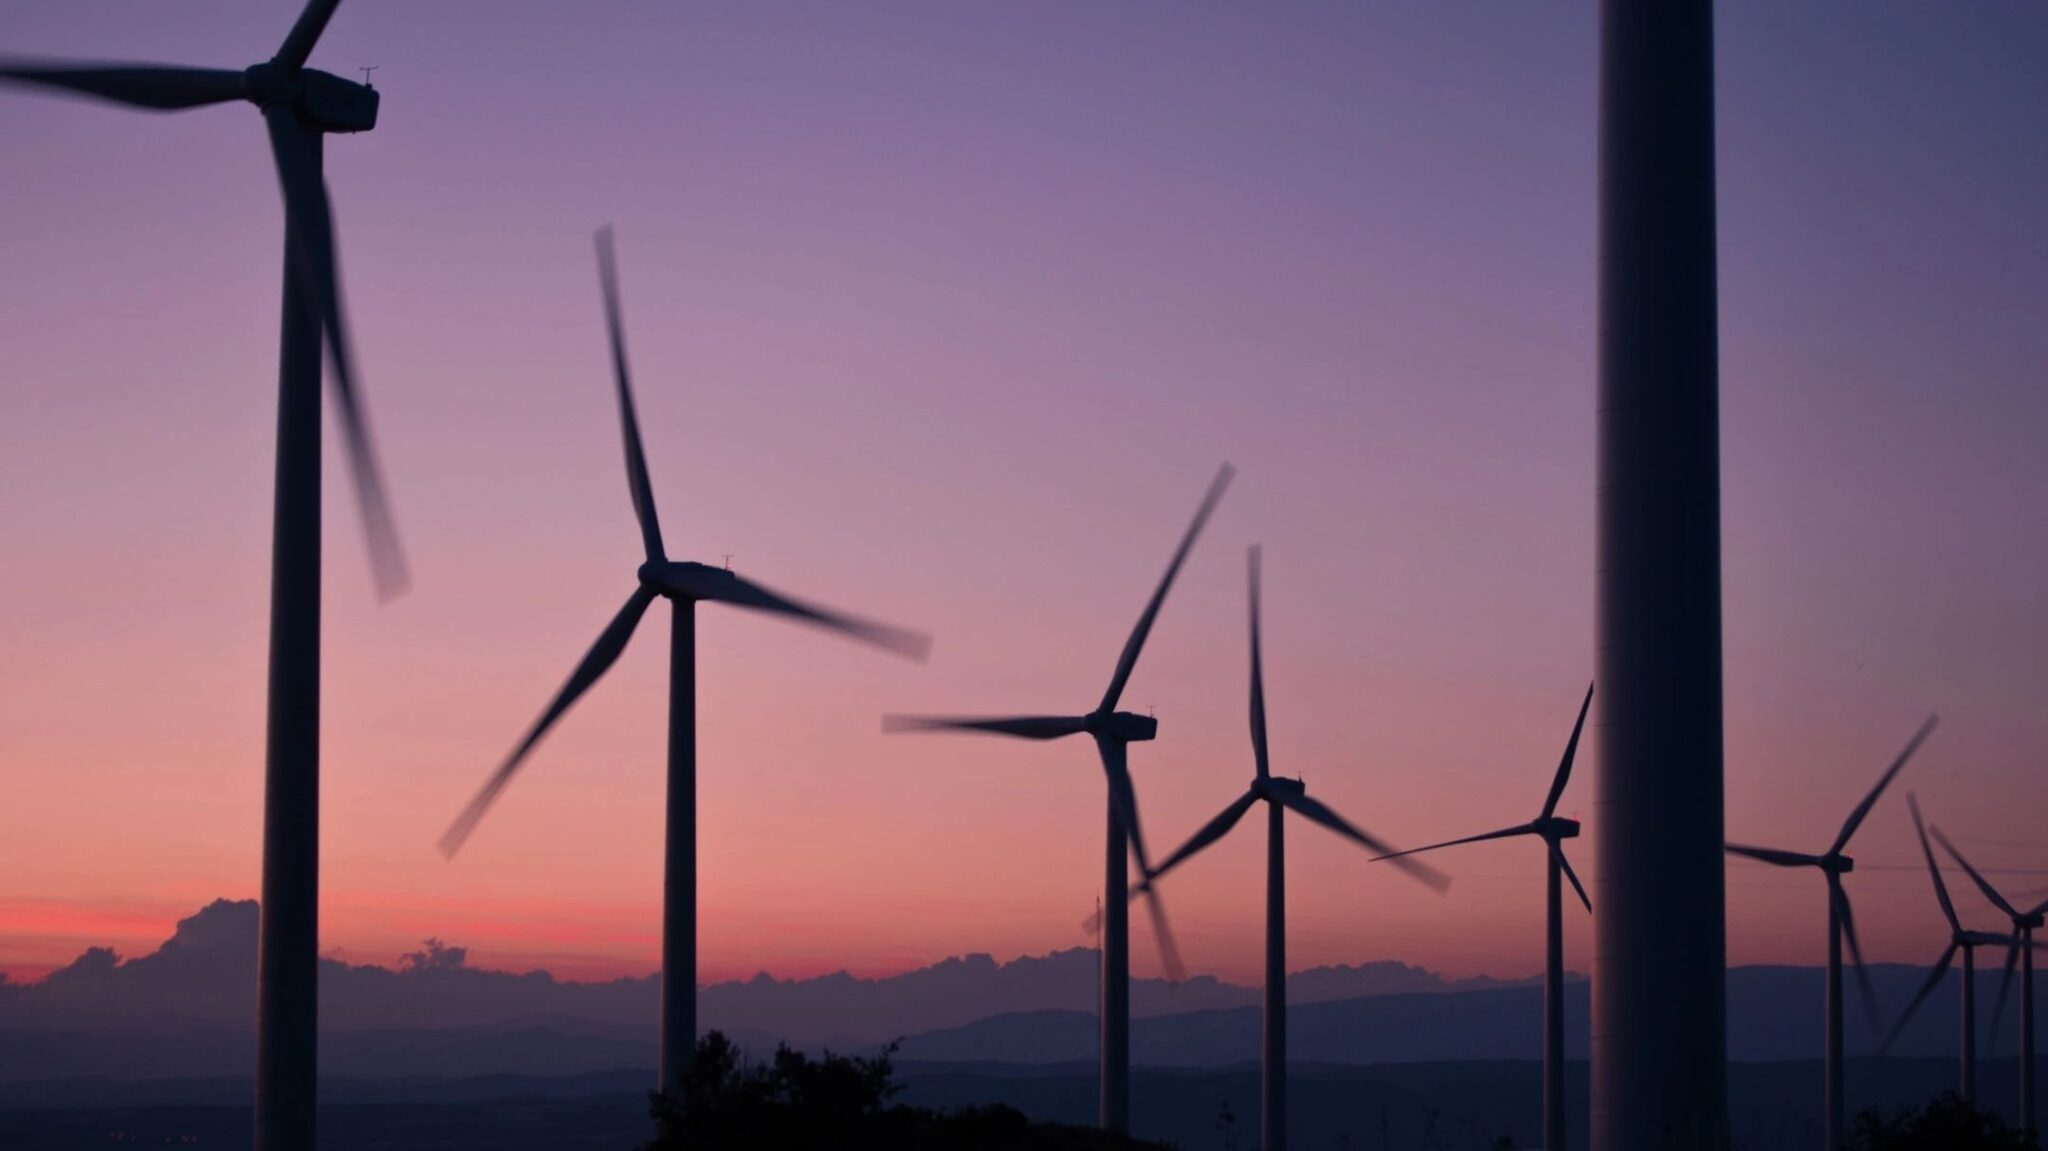 A row of wind turbines turn in the wind as the sunsets in a display of pink and purple sky's.